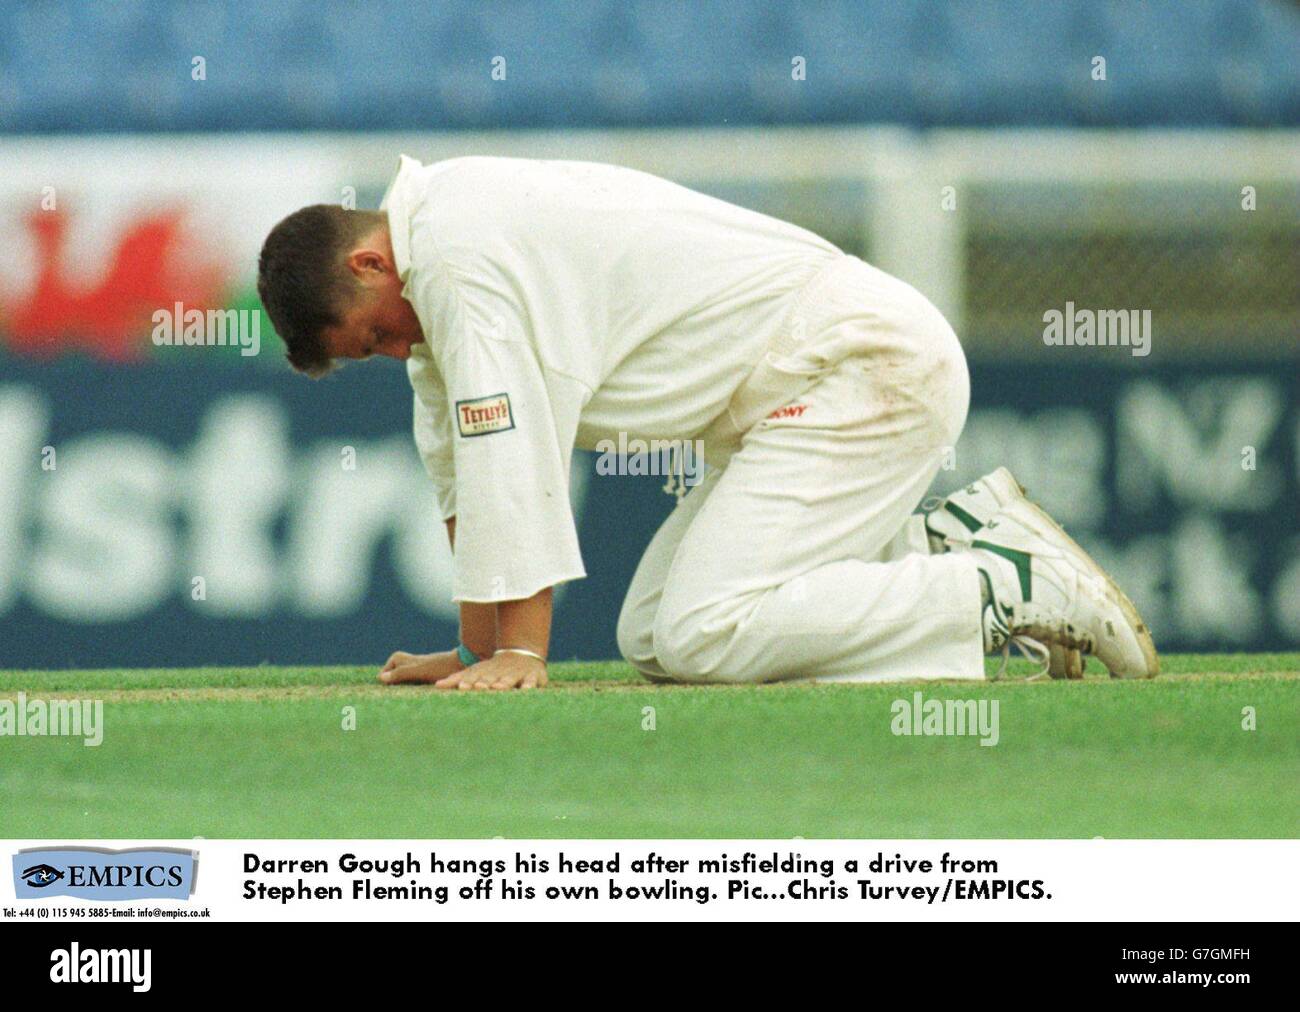 Darren Gough hangs his head after misfielding a drive from Stephen Fleming off his own bowling. Stock Photo